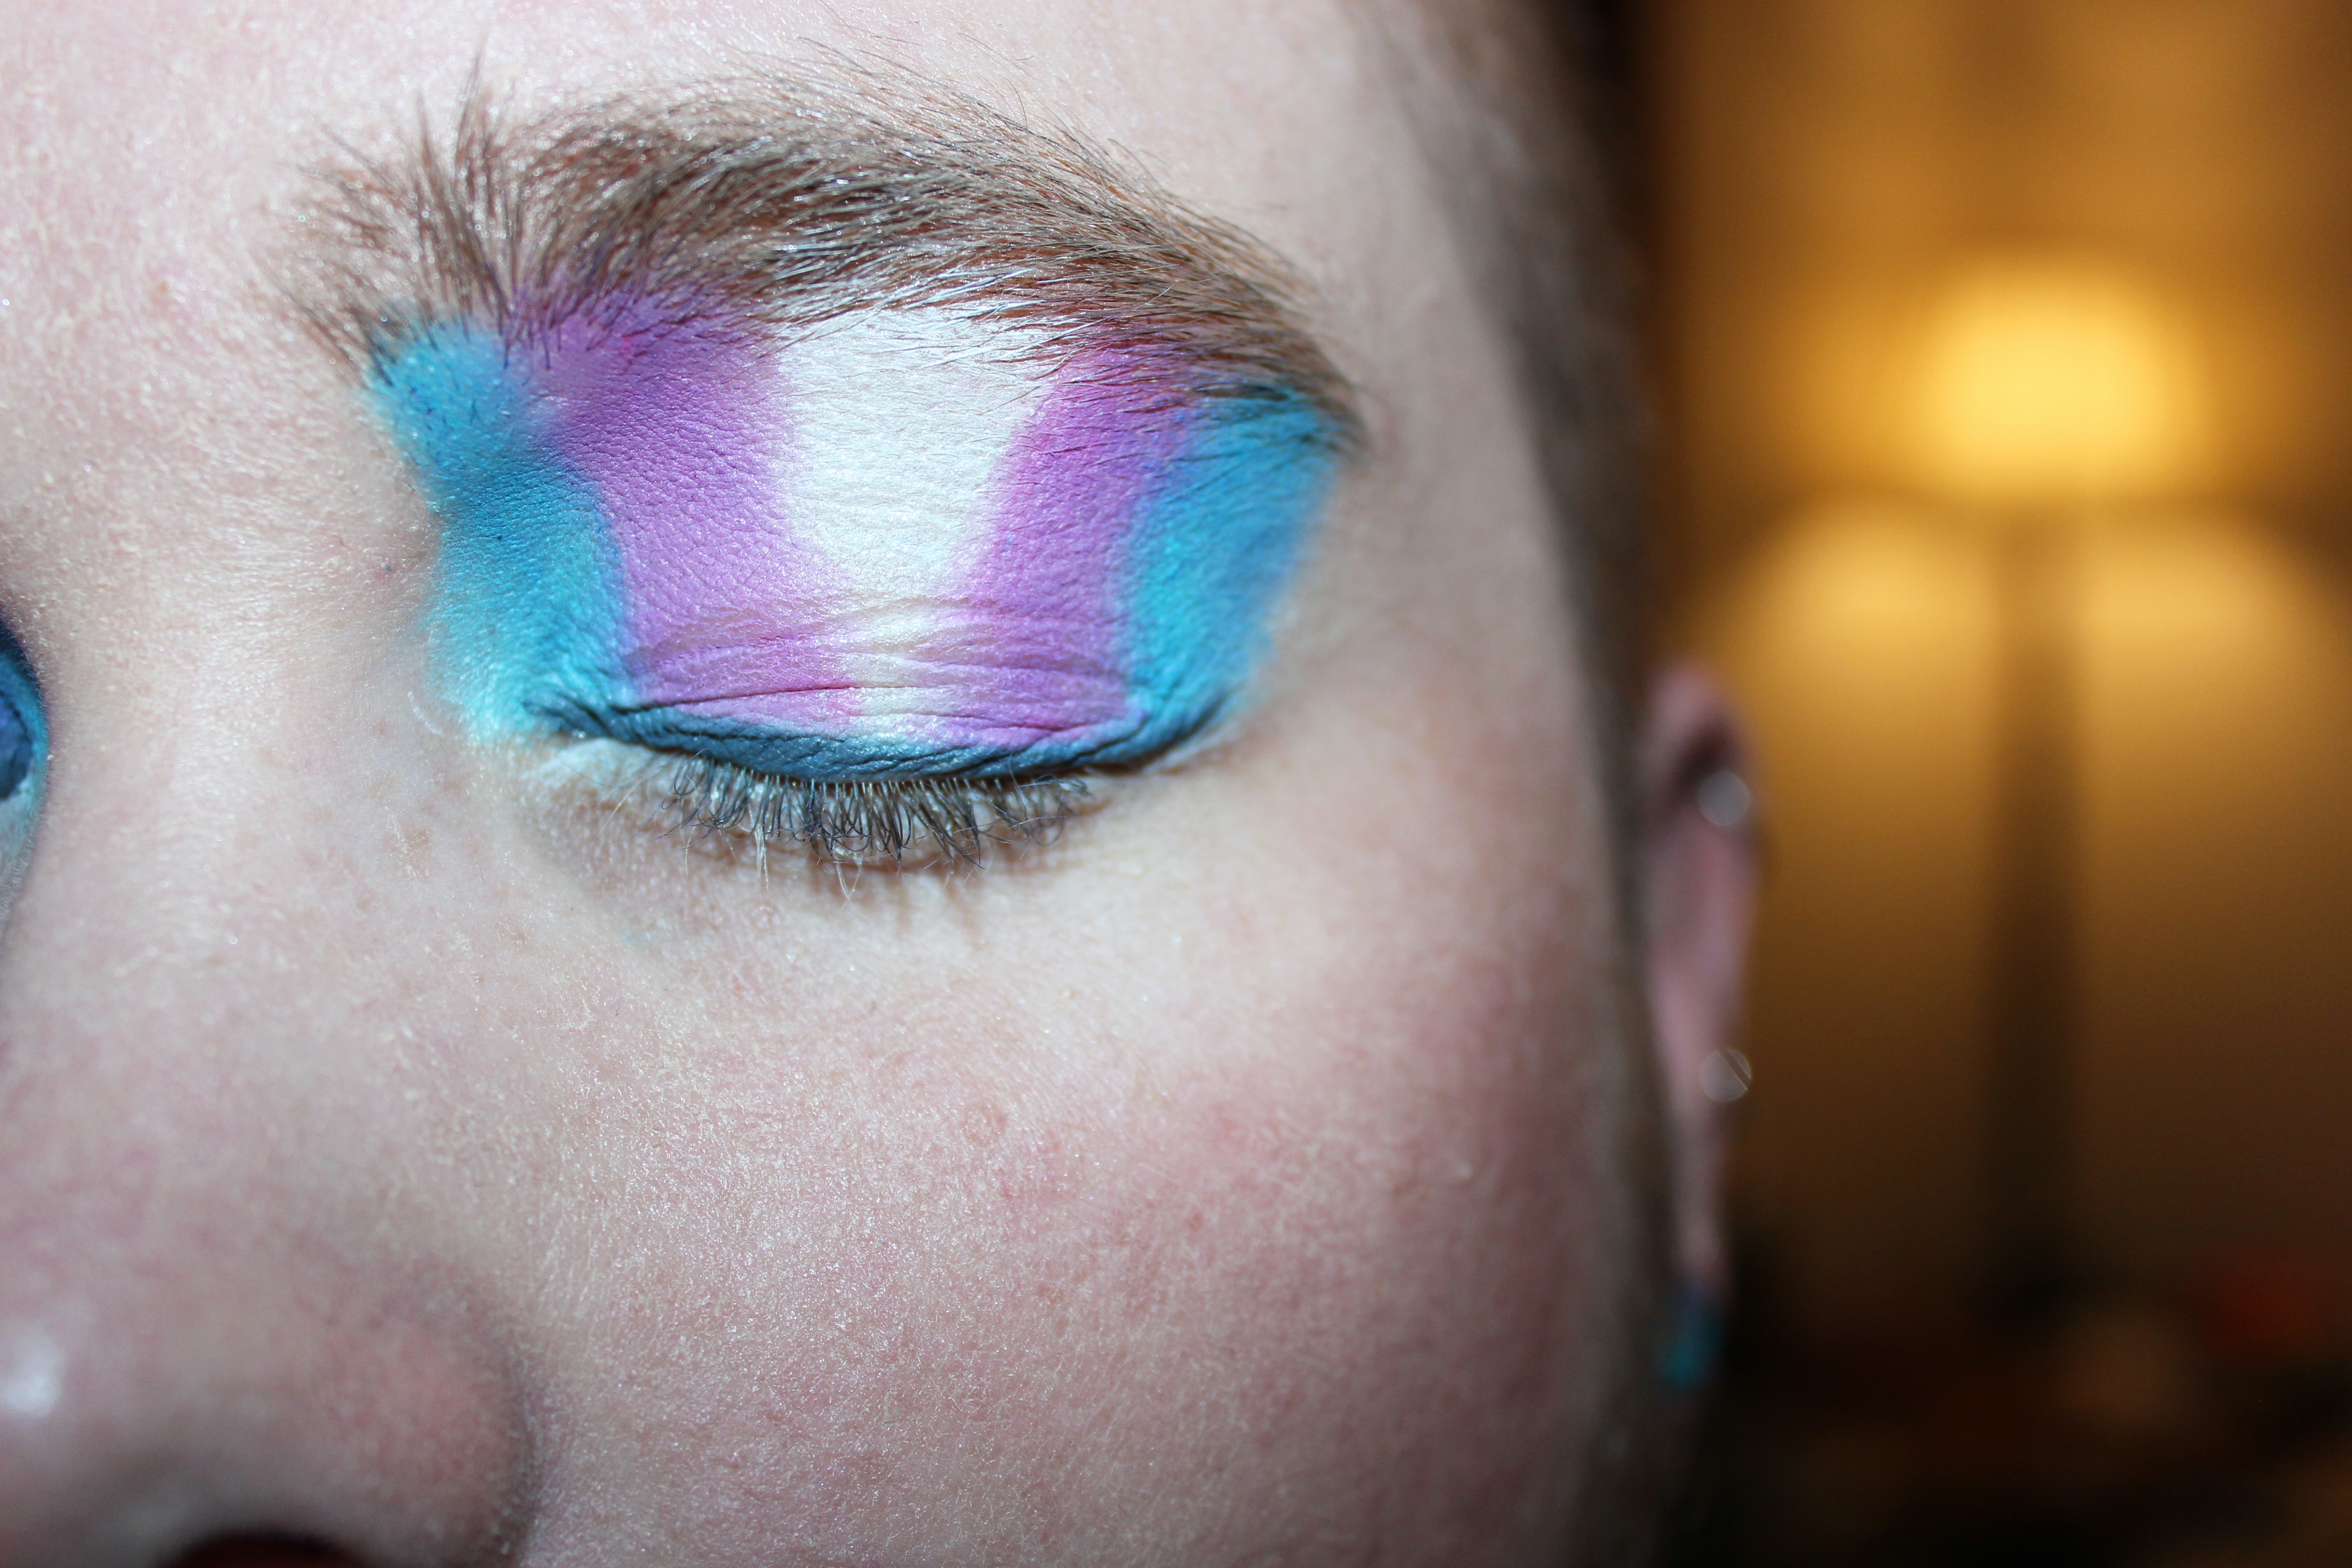 A close-up of a an eye wearing makeup in trans pride colours